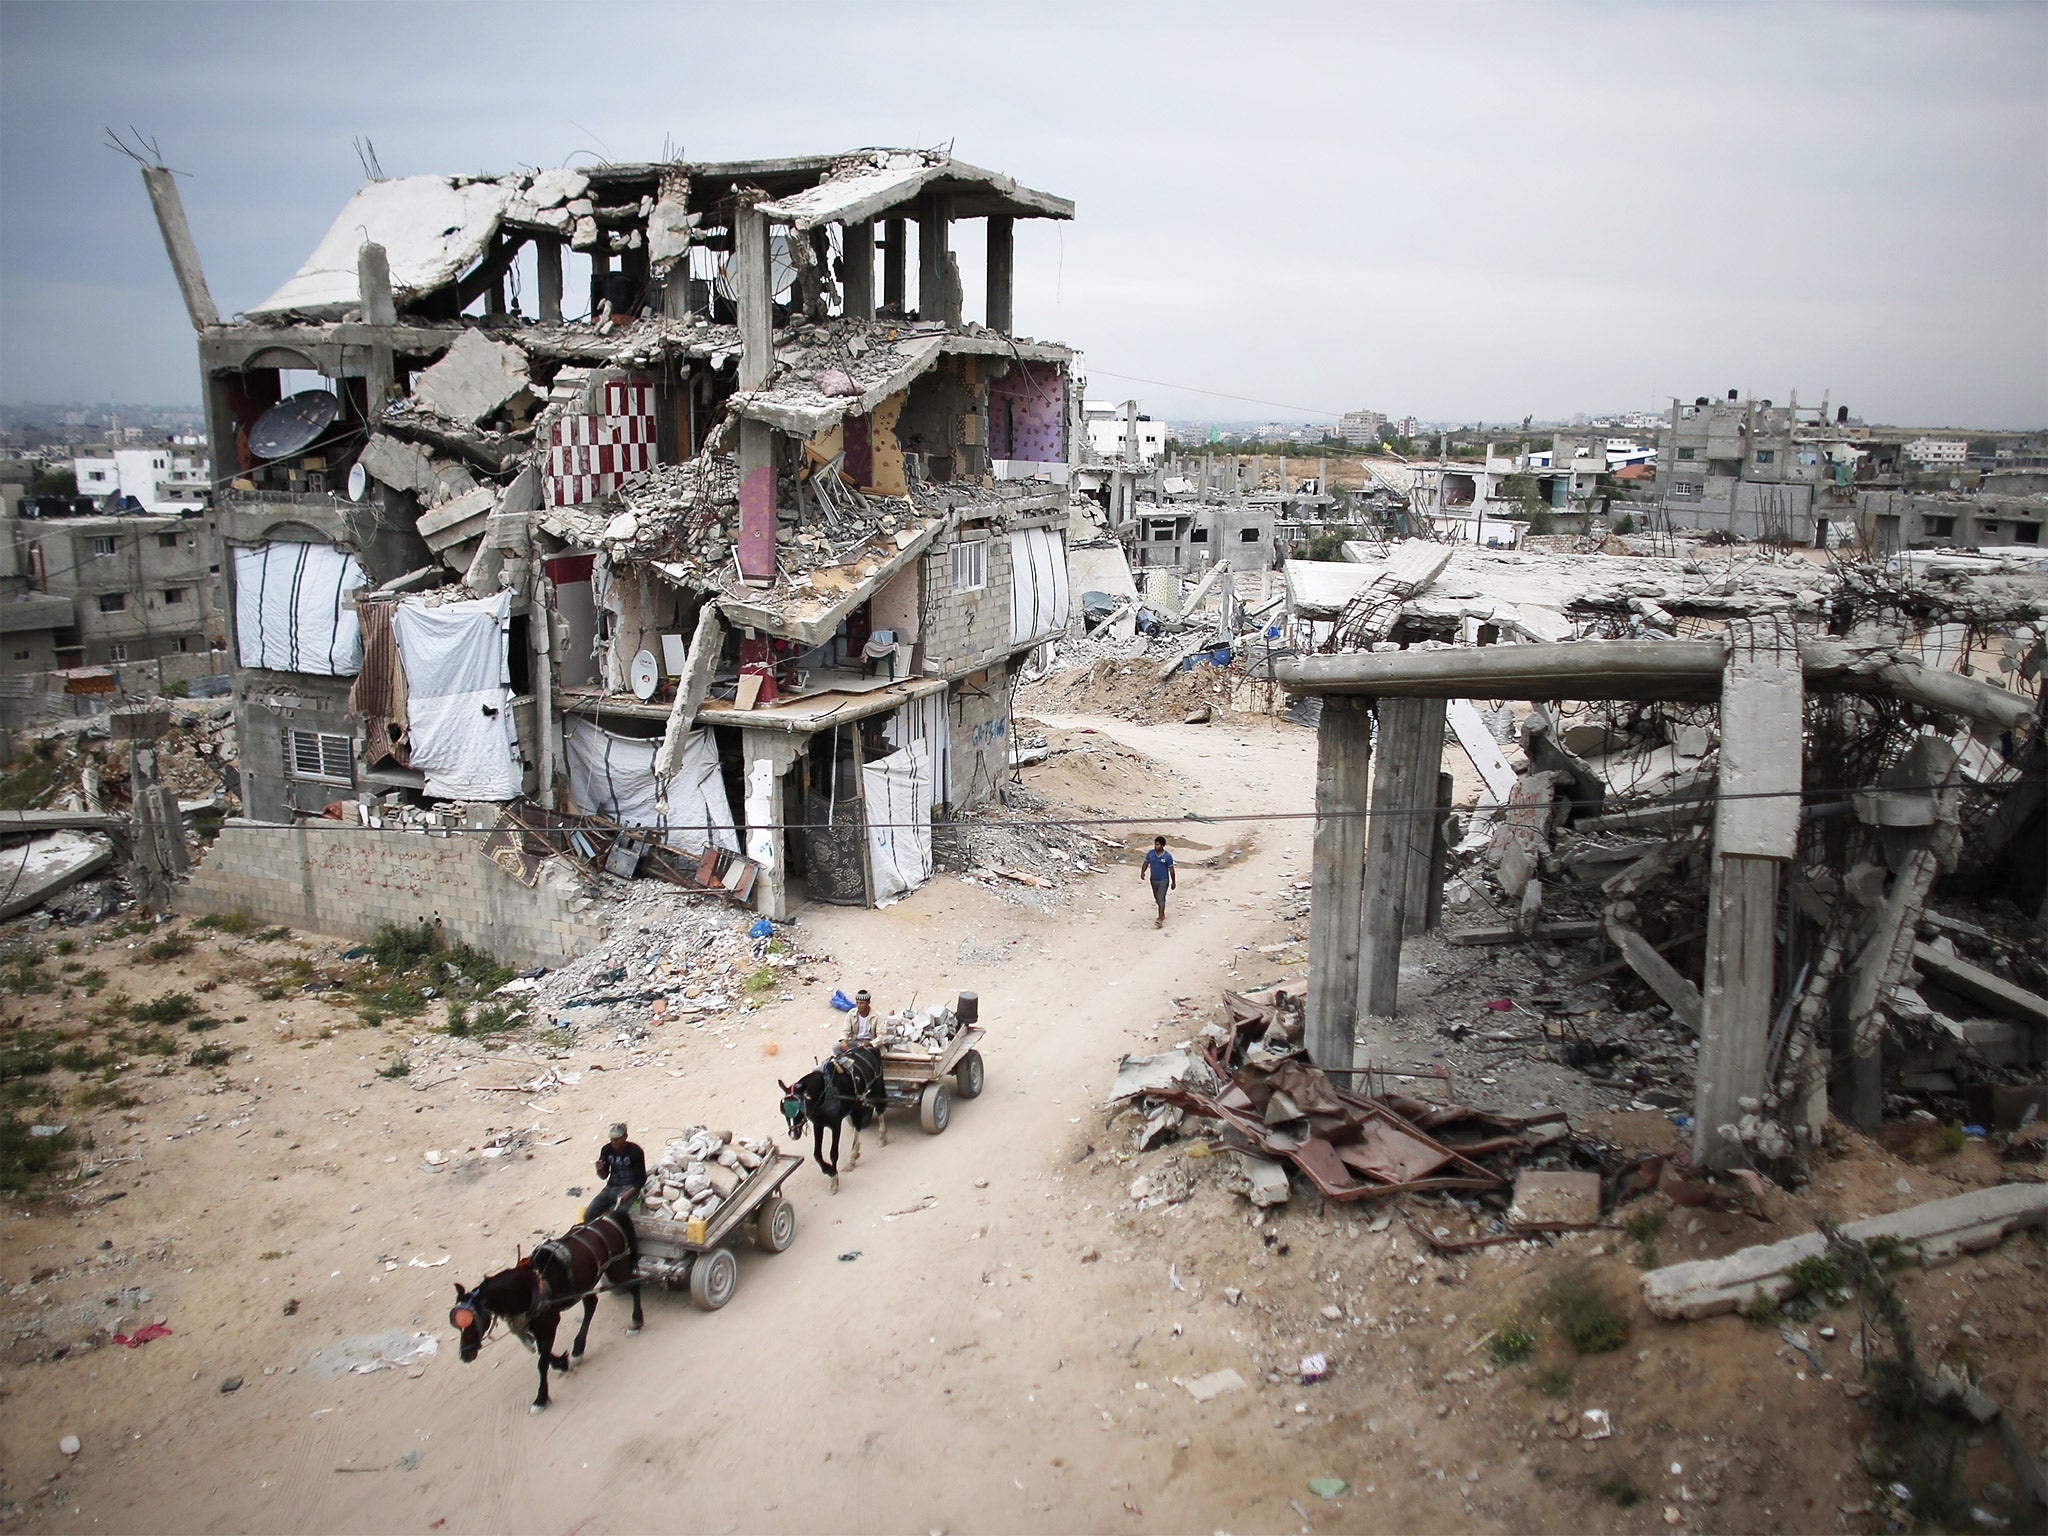 Parts of eastern Gaza are still in ruins, over a year on from the 50-day war (Getty)